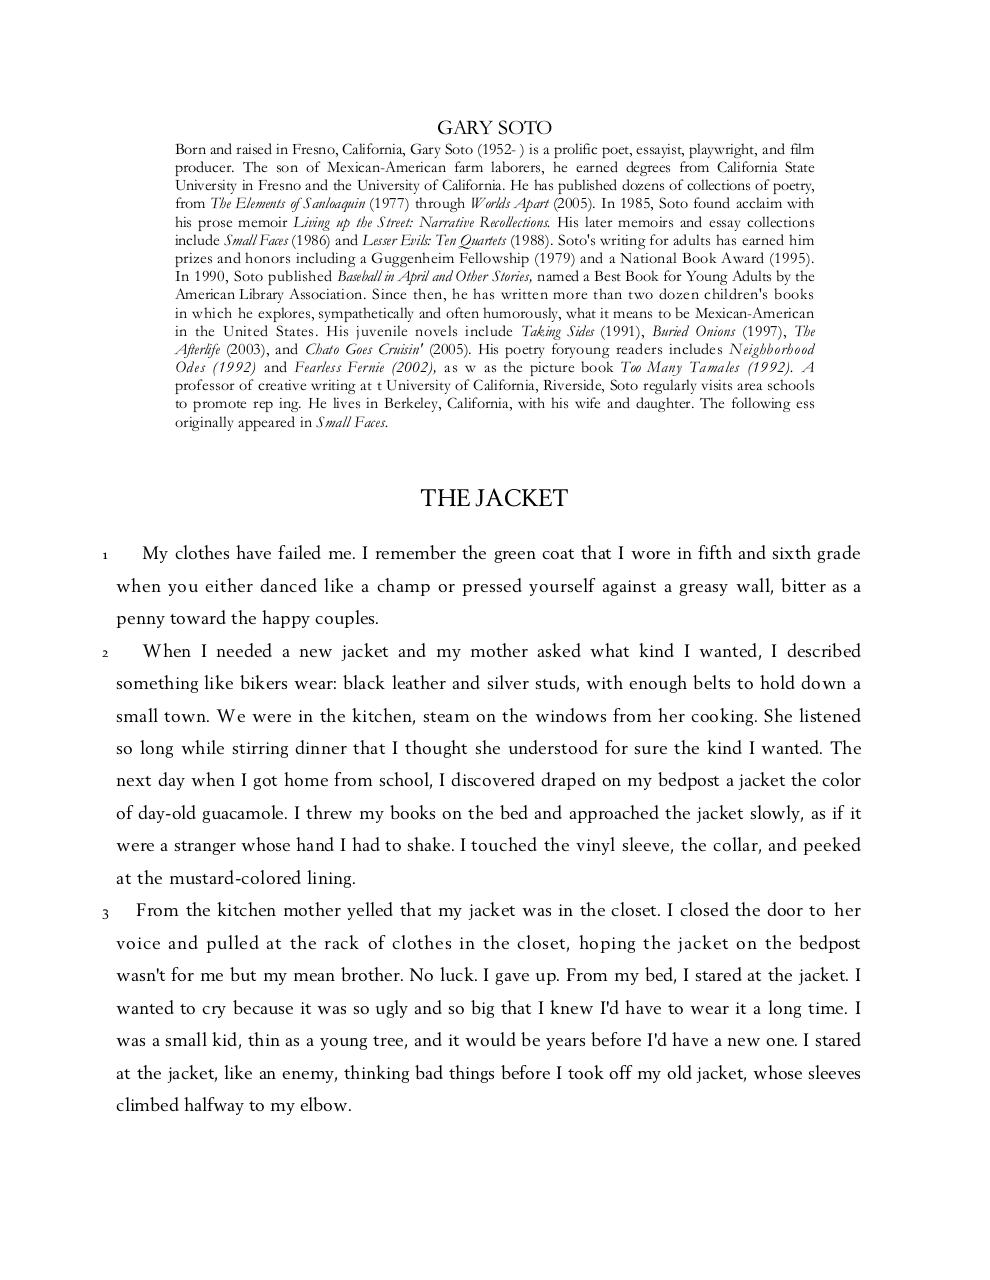 The Jacket by Gary Soto.pdf - page 1/6